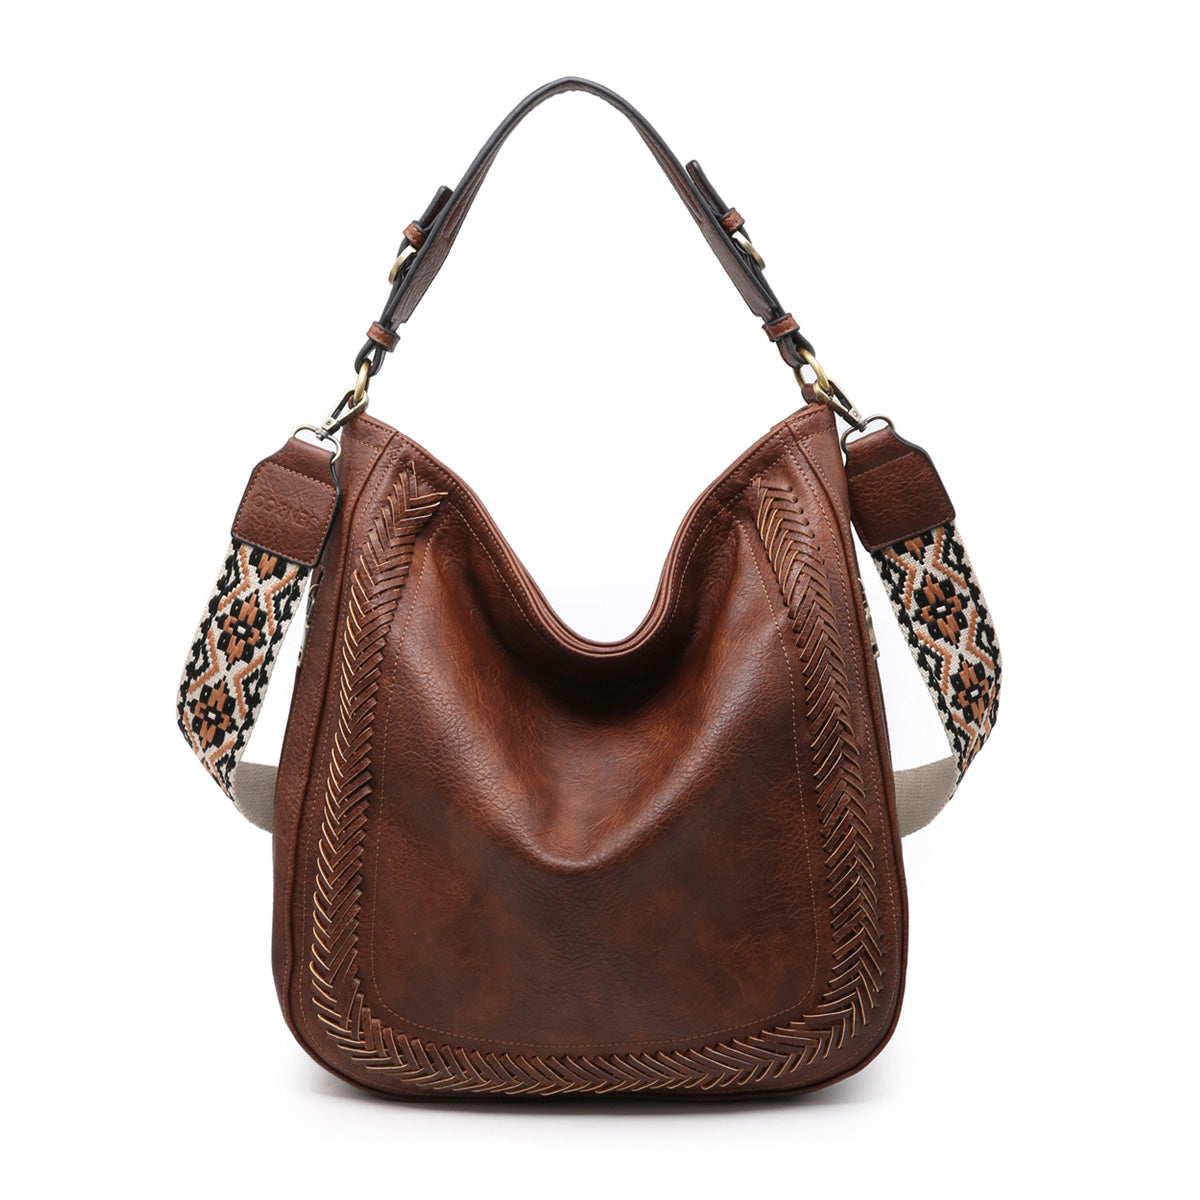 Aris Whipstitch Hobo/Crossbody w/ Guitar Strap - Rust Brown - Southern Grace Creations